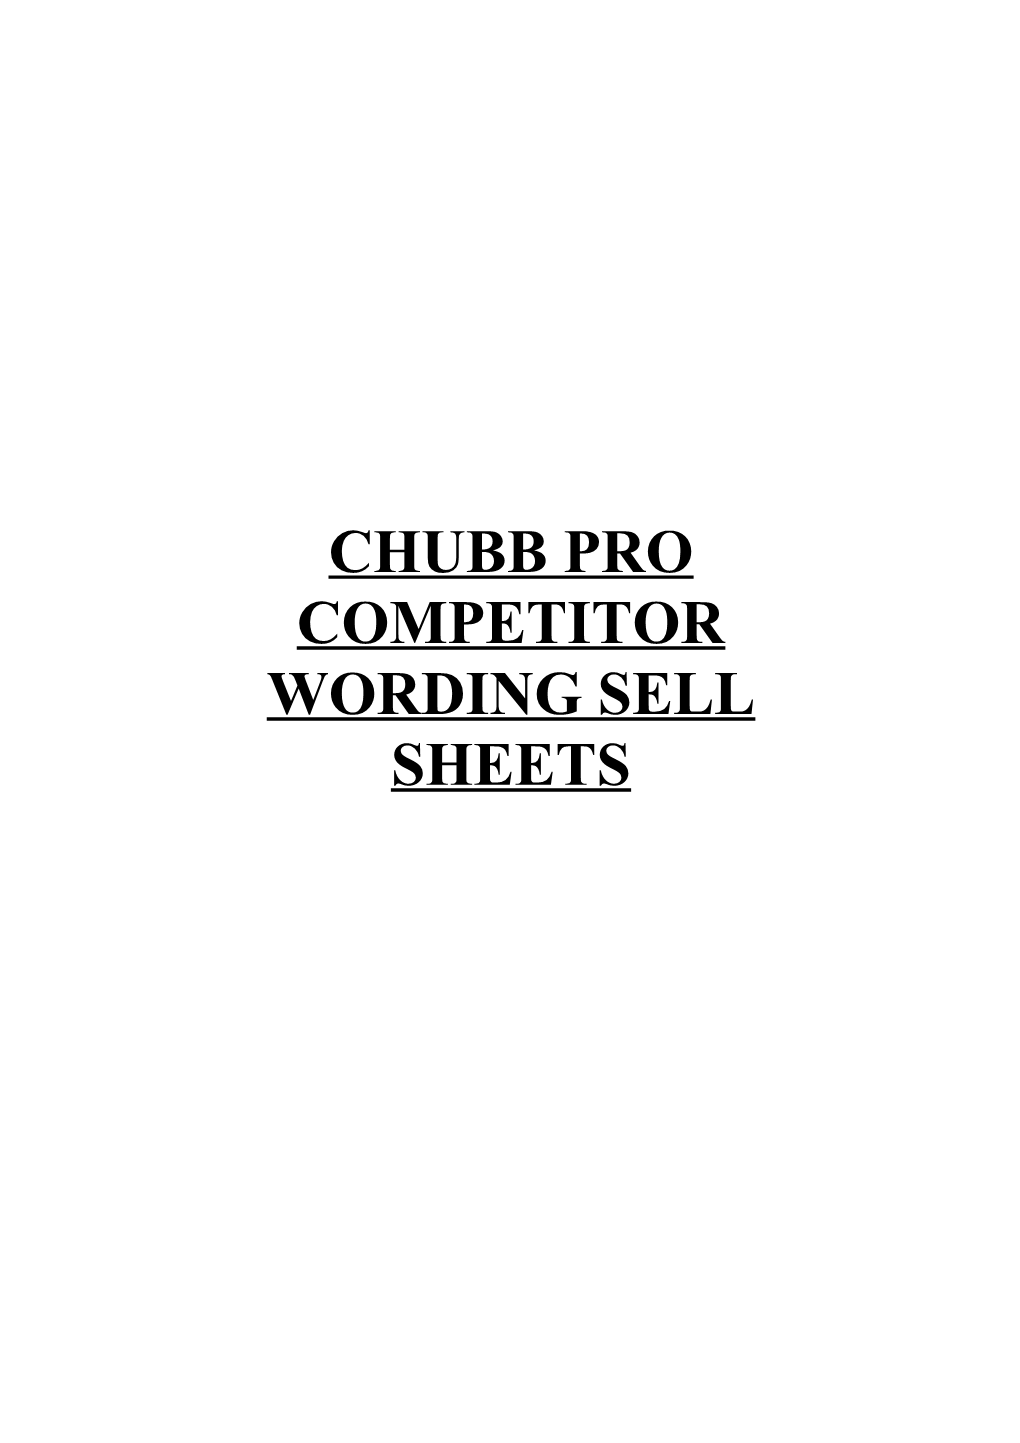 Chubb Pro Competitor Wording Comparisons